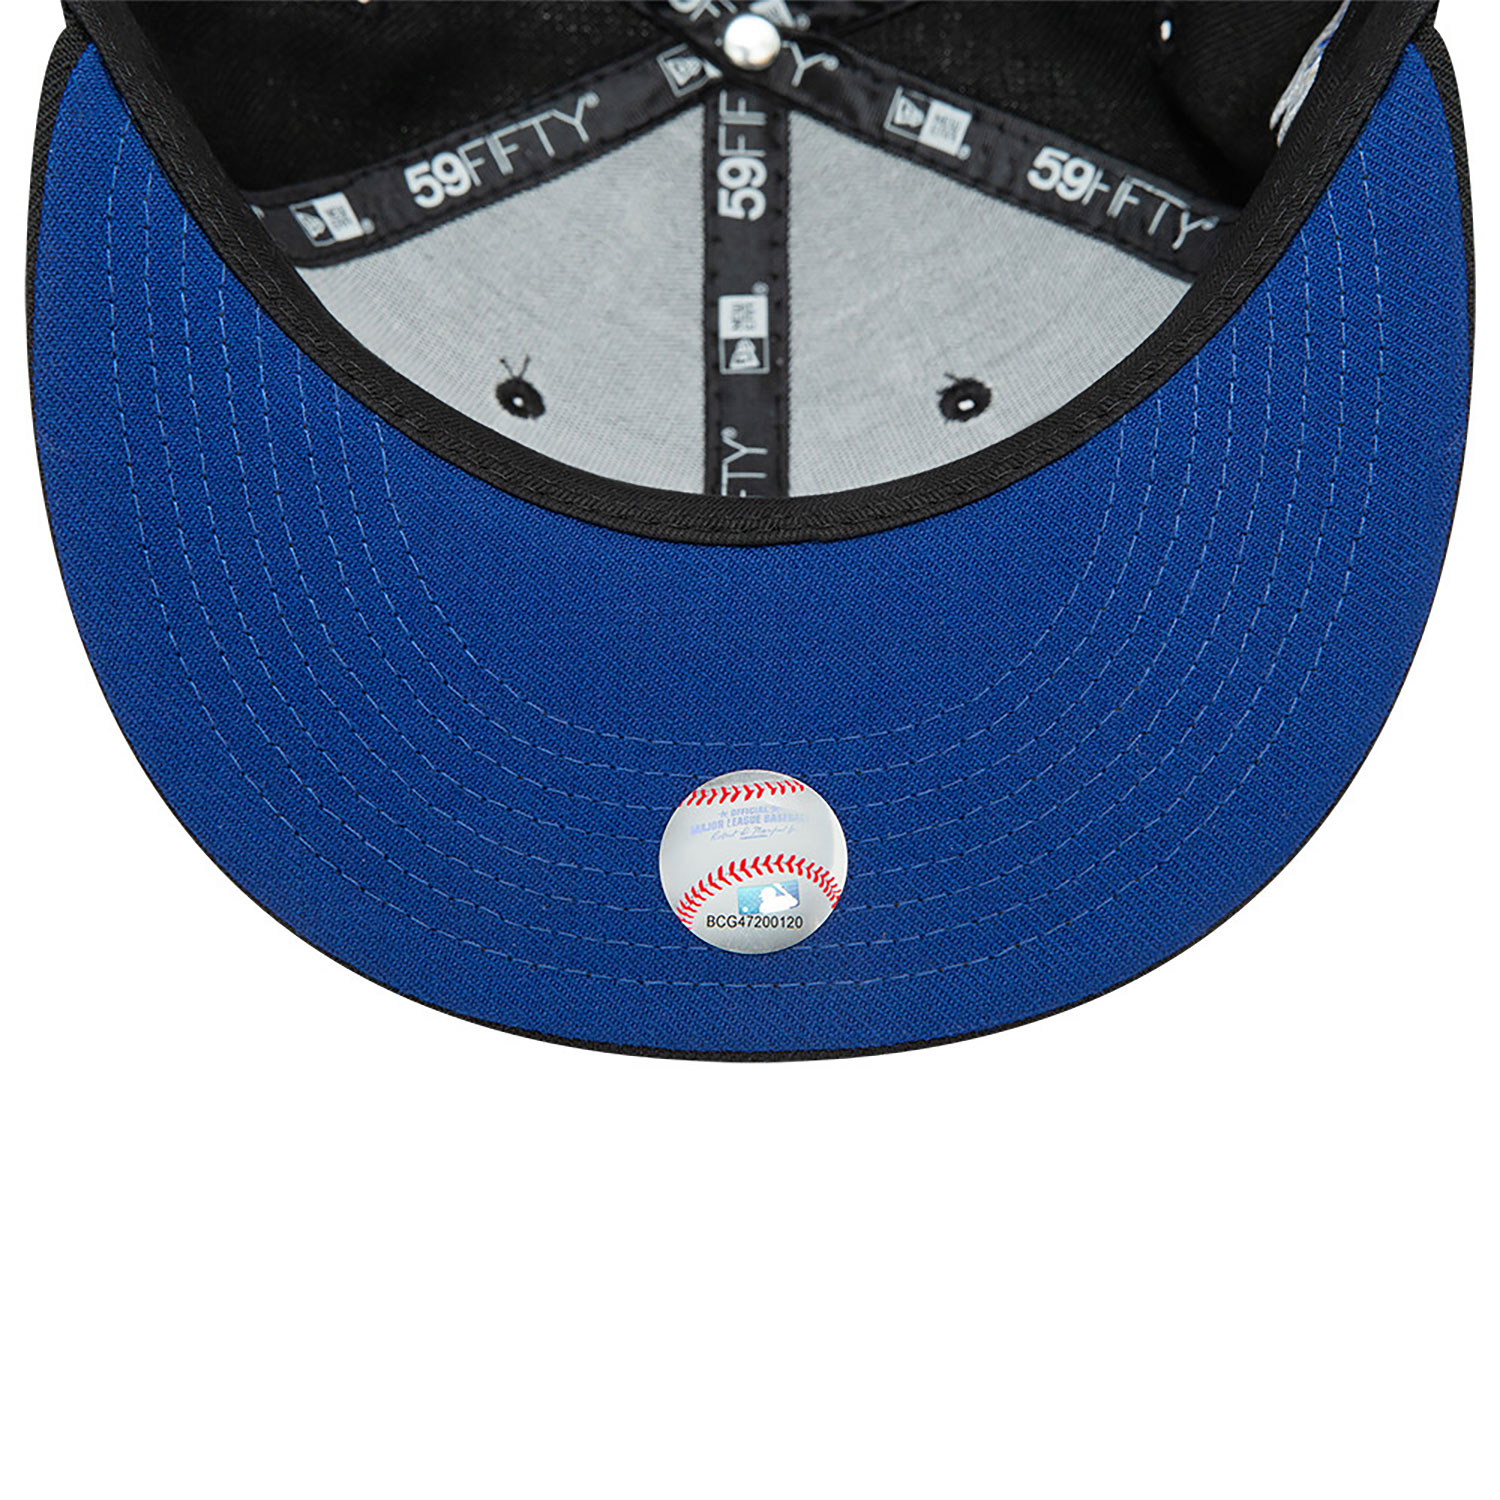 Philadelphia Athletics MLB Since Day One Black 59FIFTY Fitted Cap